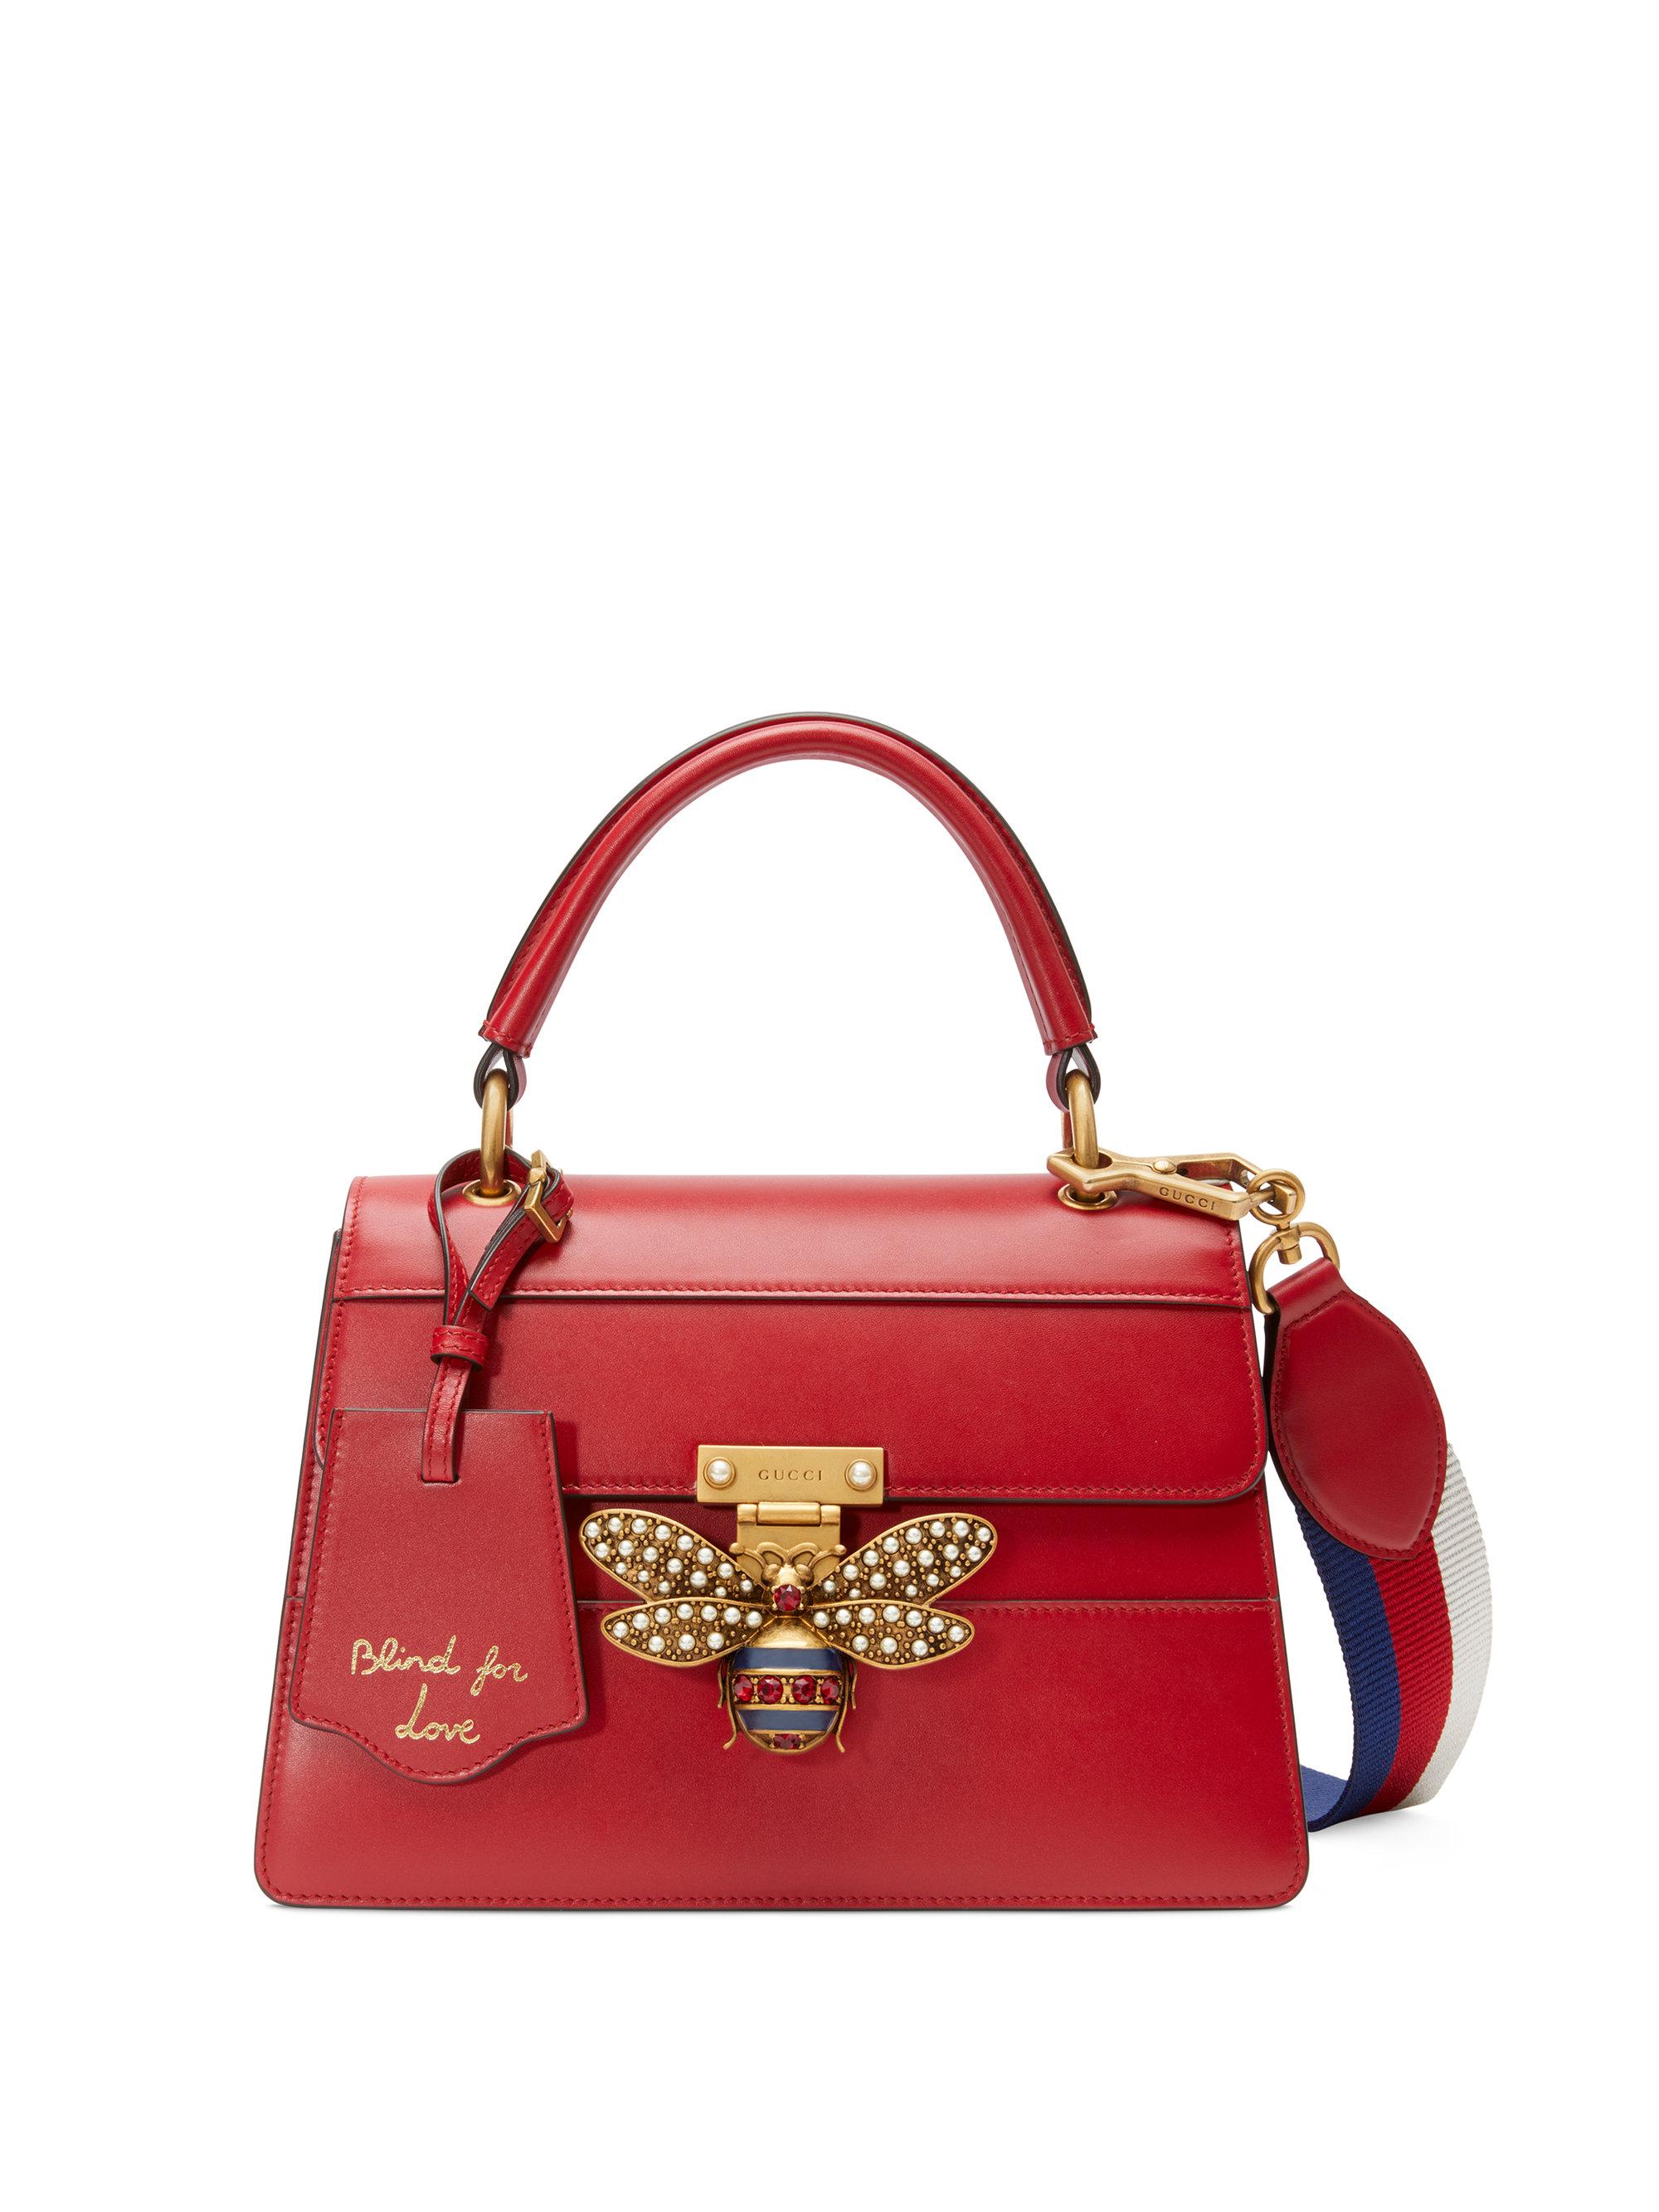 Gucci Leather Queen Margaret Small Top Handle Bag in Red - Lyst